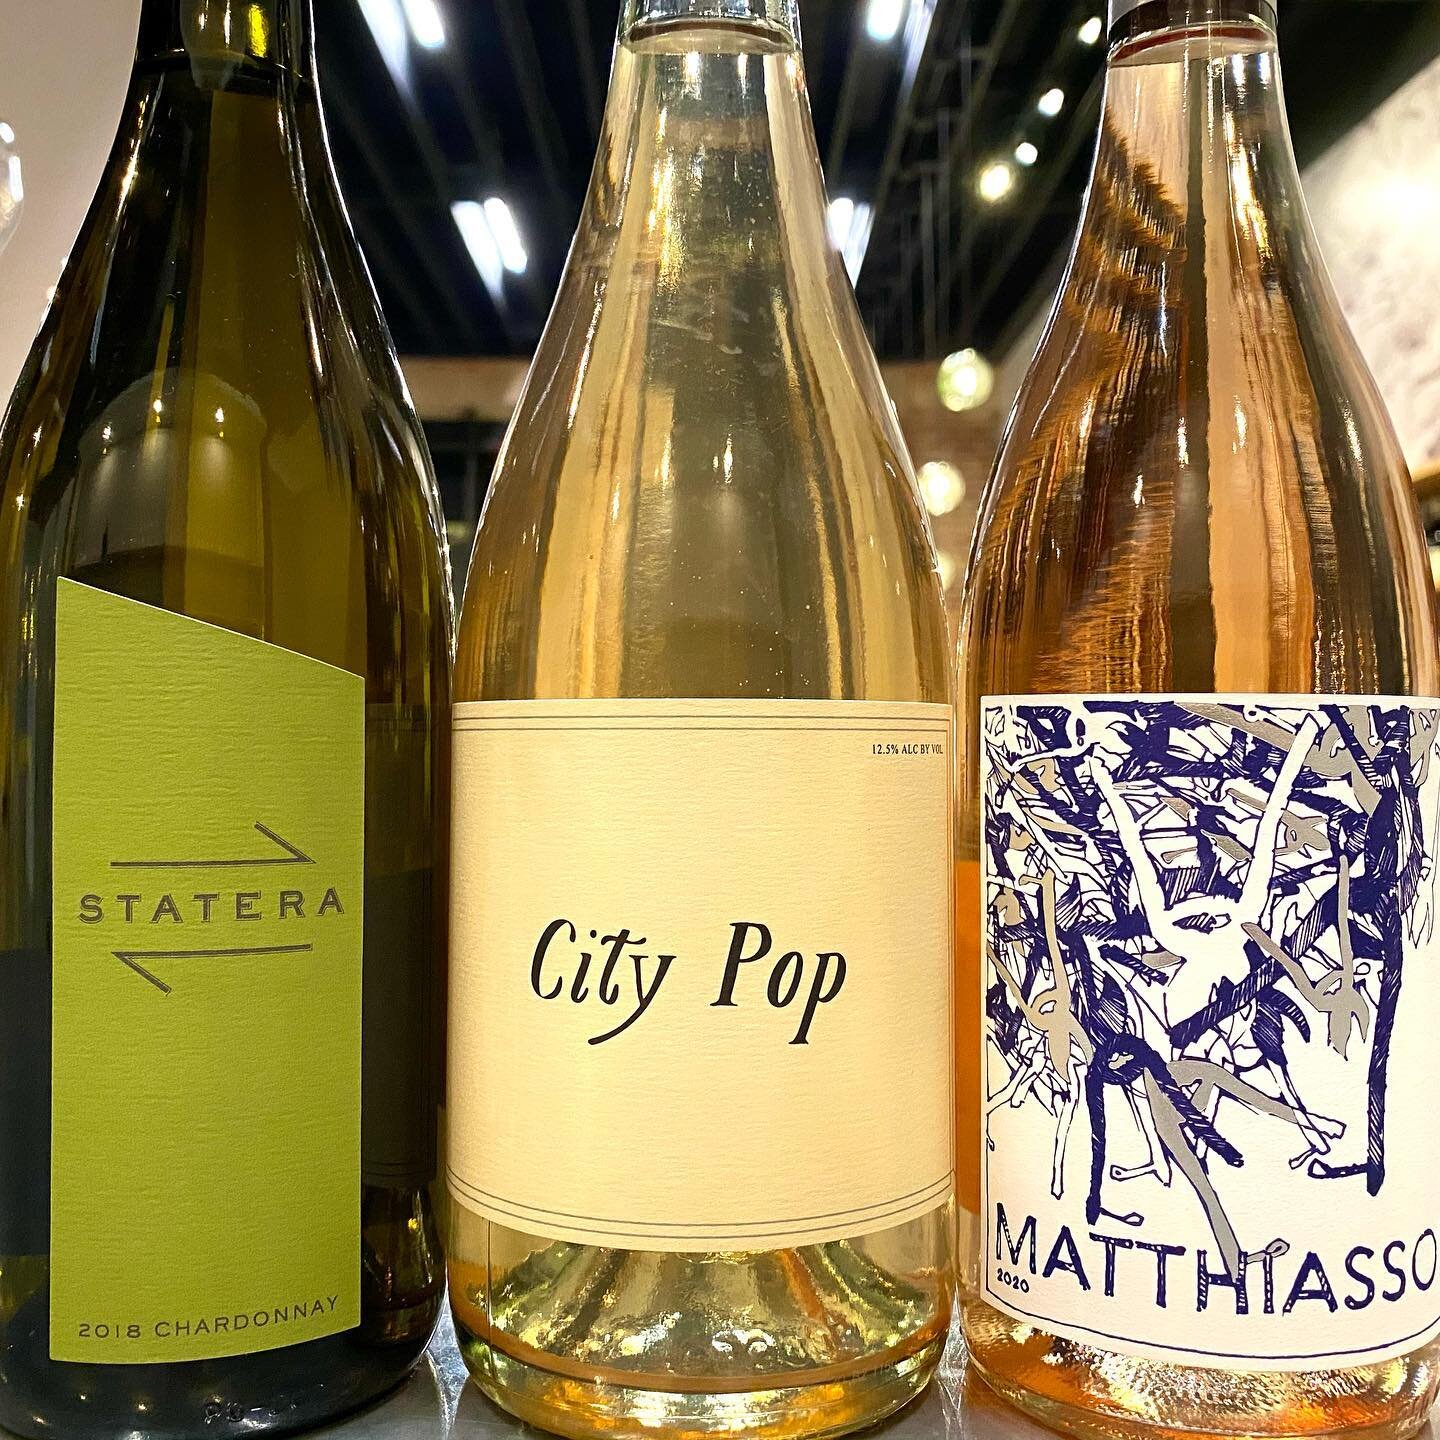 Trio of New Domestic Arrivals! New domestic arrivals are rolling in--and we&rsquo;re even starting to see wines from the 2020 vintage. The trio includes one of our all-time favorite ros&eacute;s, a super-limited p&eacute;t-nat, and an Oregon label ma